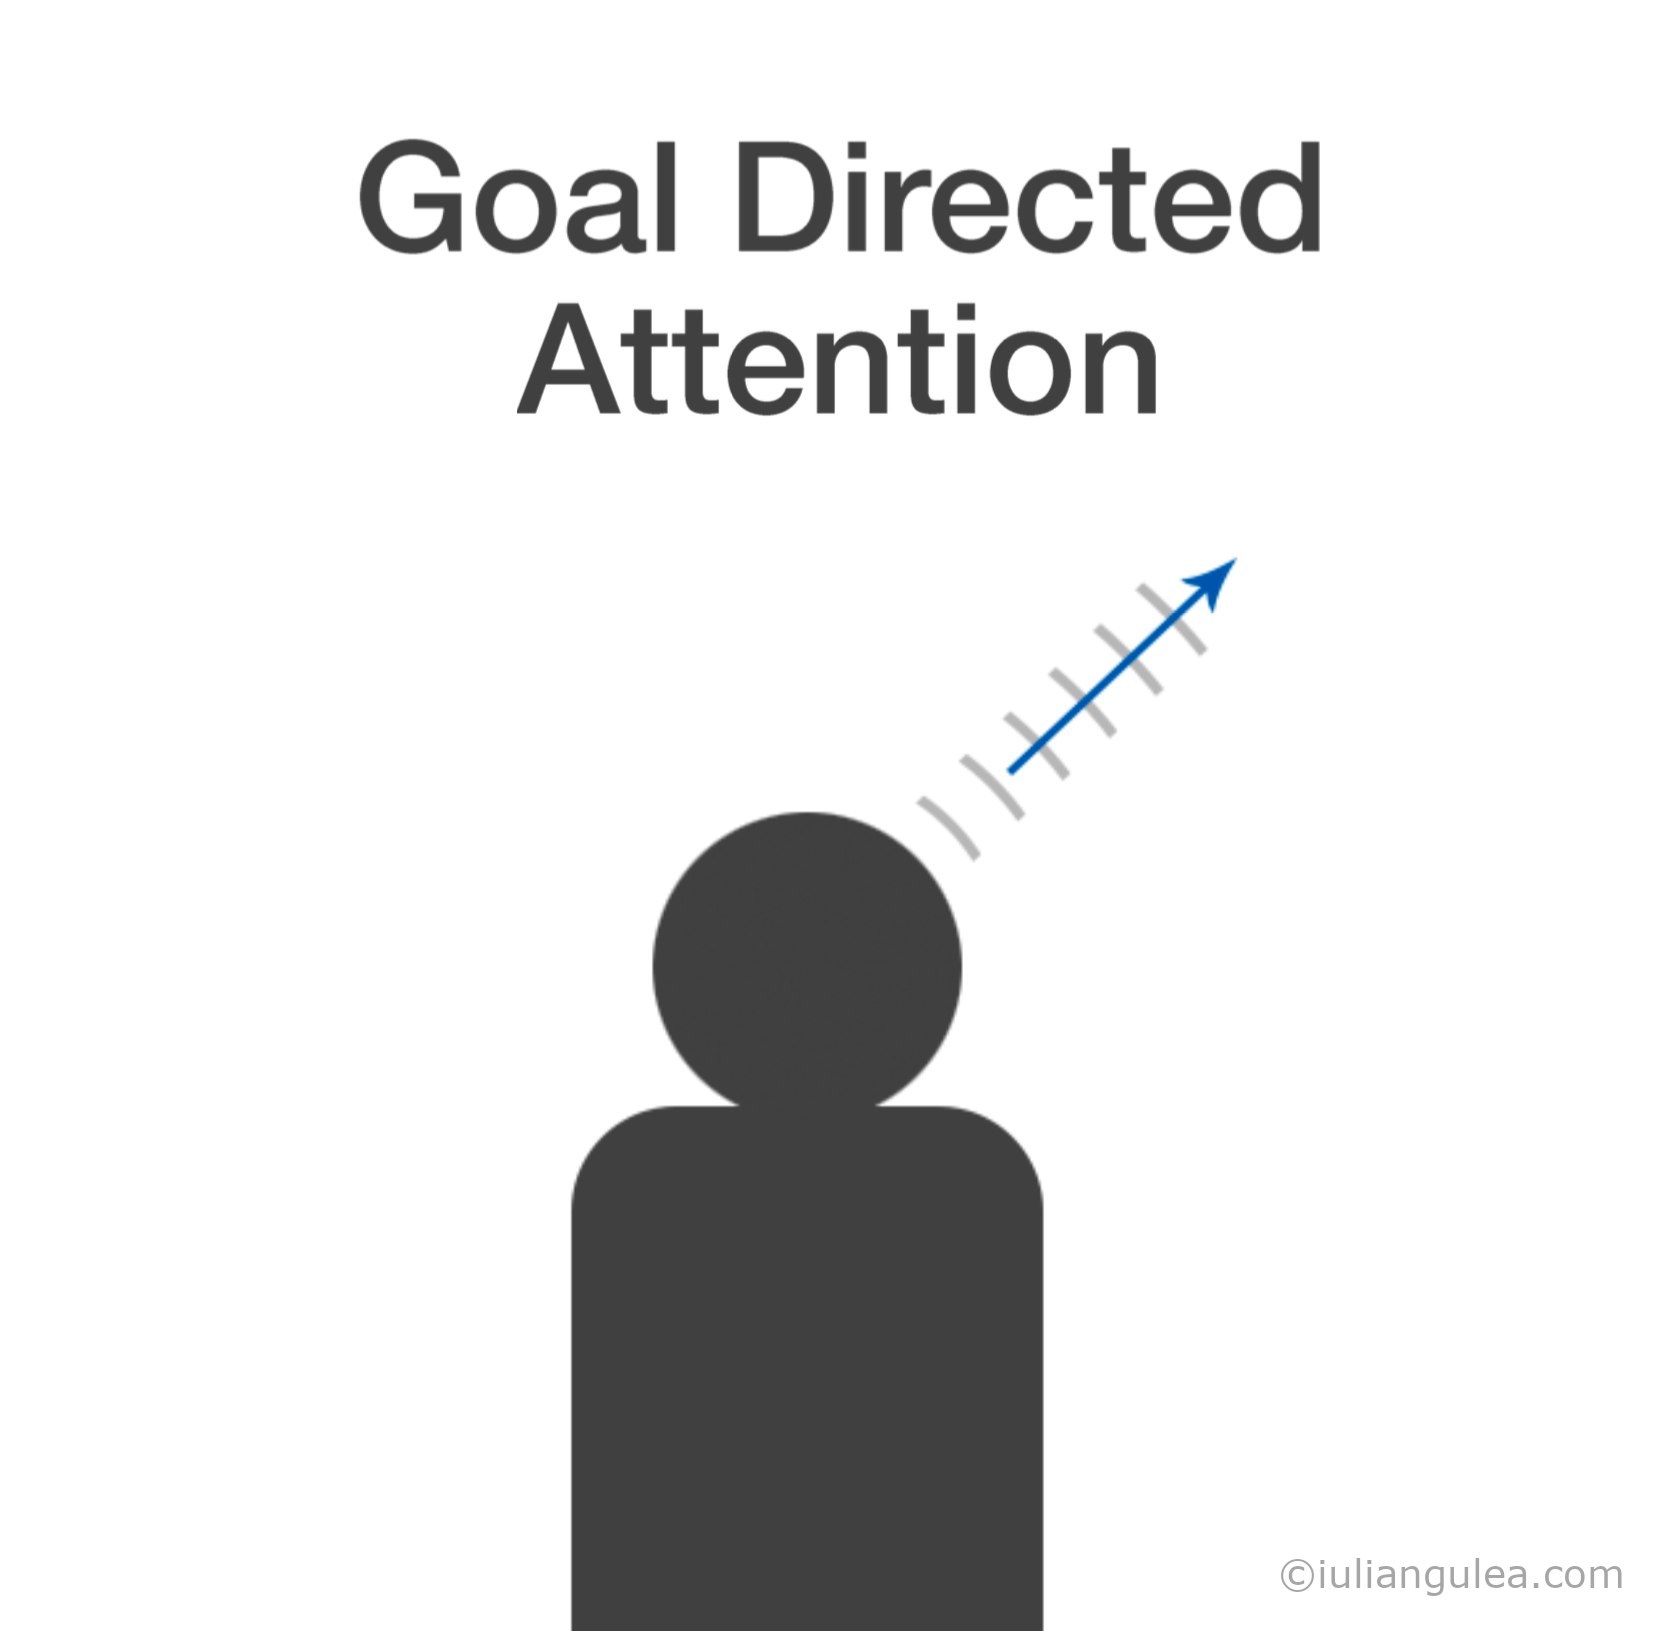 Image with Goal-Directed attention that is narrow